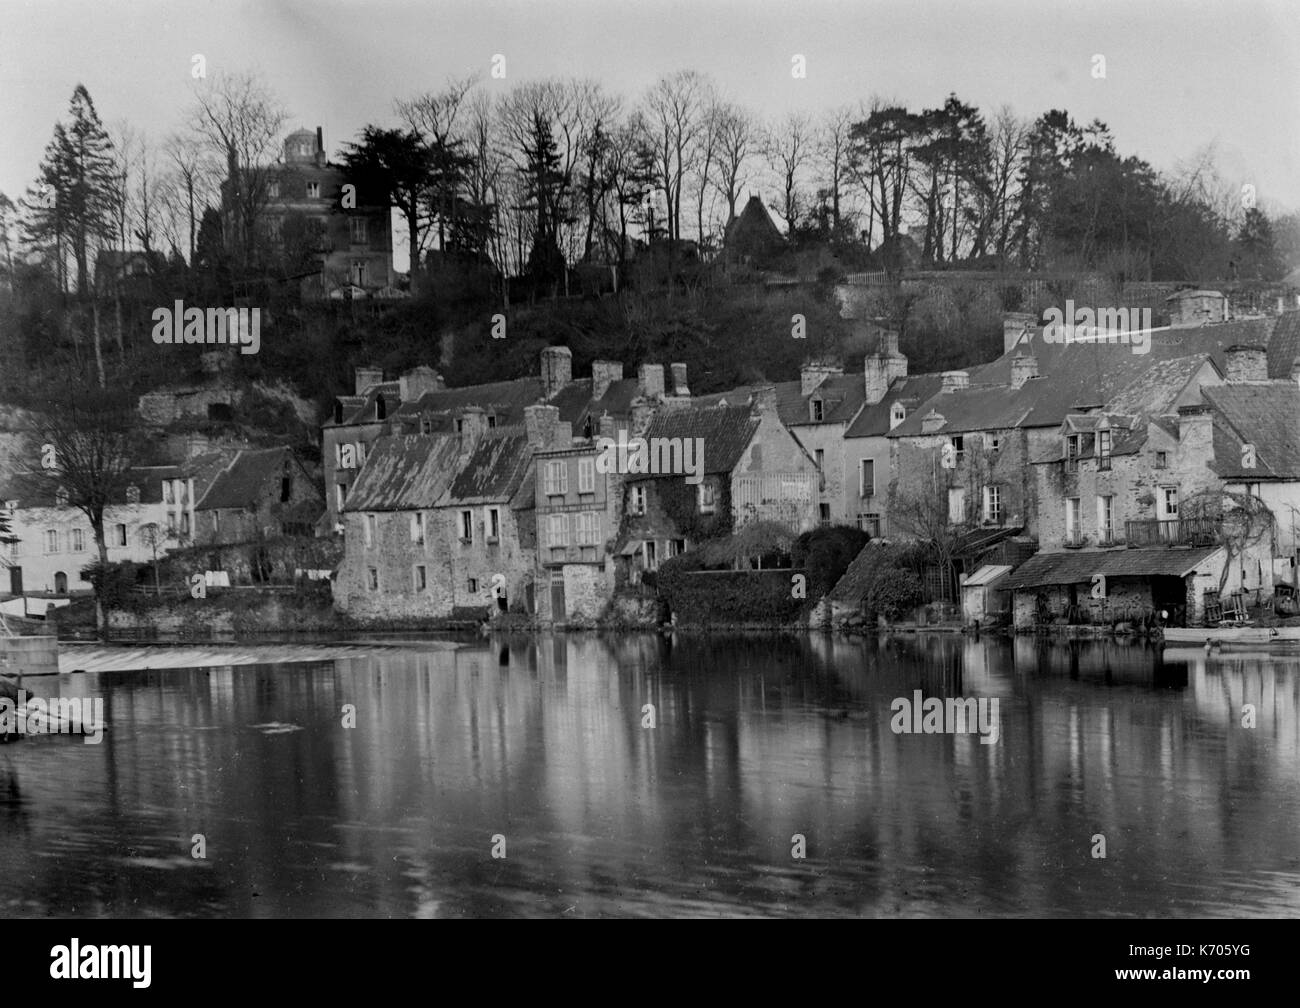 AJAXNETPHOTO. 1891-1910 (APPROX). SAINT LO, FRANCE. - LA VIRE RIVER AND WEIR BELOW THE TERRACED HILLSIDE. PHOTOGRAPHER:UNKNOWN © DIGITAL IMAGE COPYRIGHT AJAX VINTAGE PICTURE LIBRARY SOURCE: AJAX VINTAGE PICTURE LIBRARY COLLECTION REF:AVL FRA 1890 B29X1229 Stock Photo